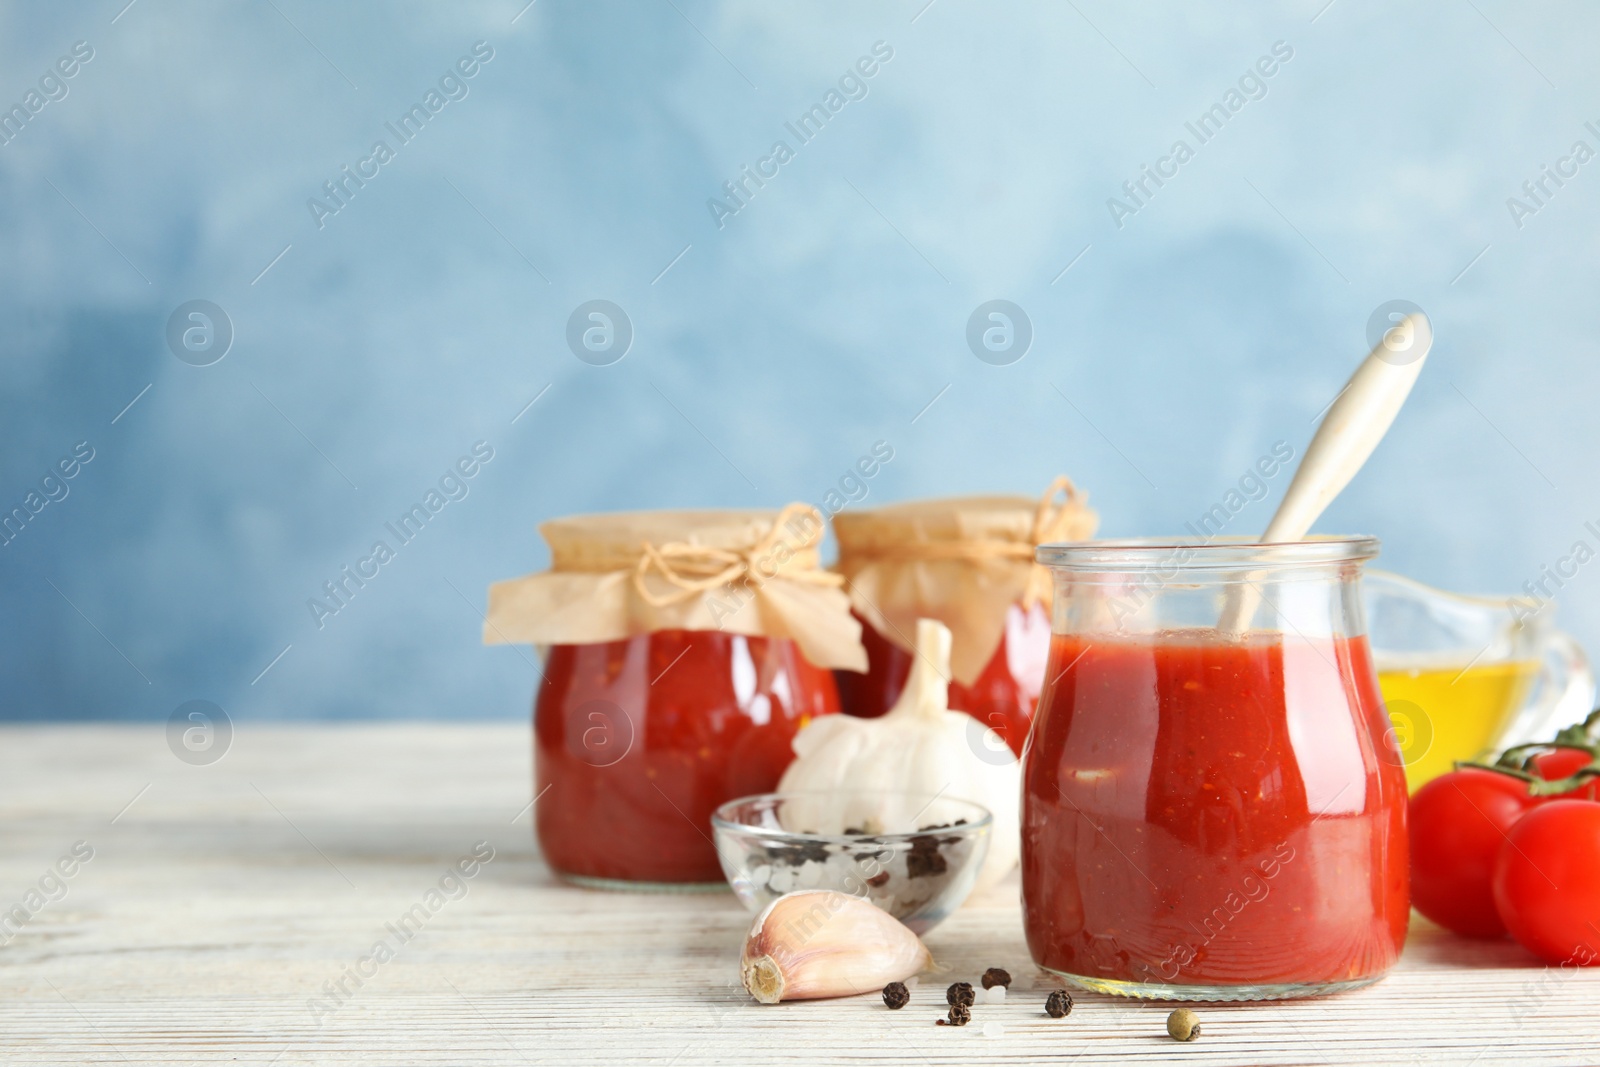 Photo of Composition with tomato sauce, spices and vegetables on table against color background. Space for text